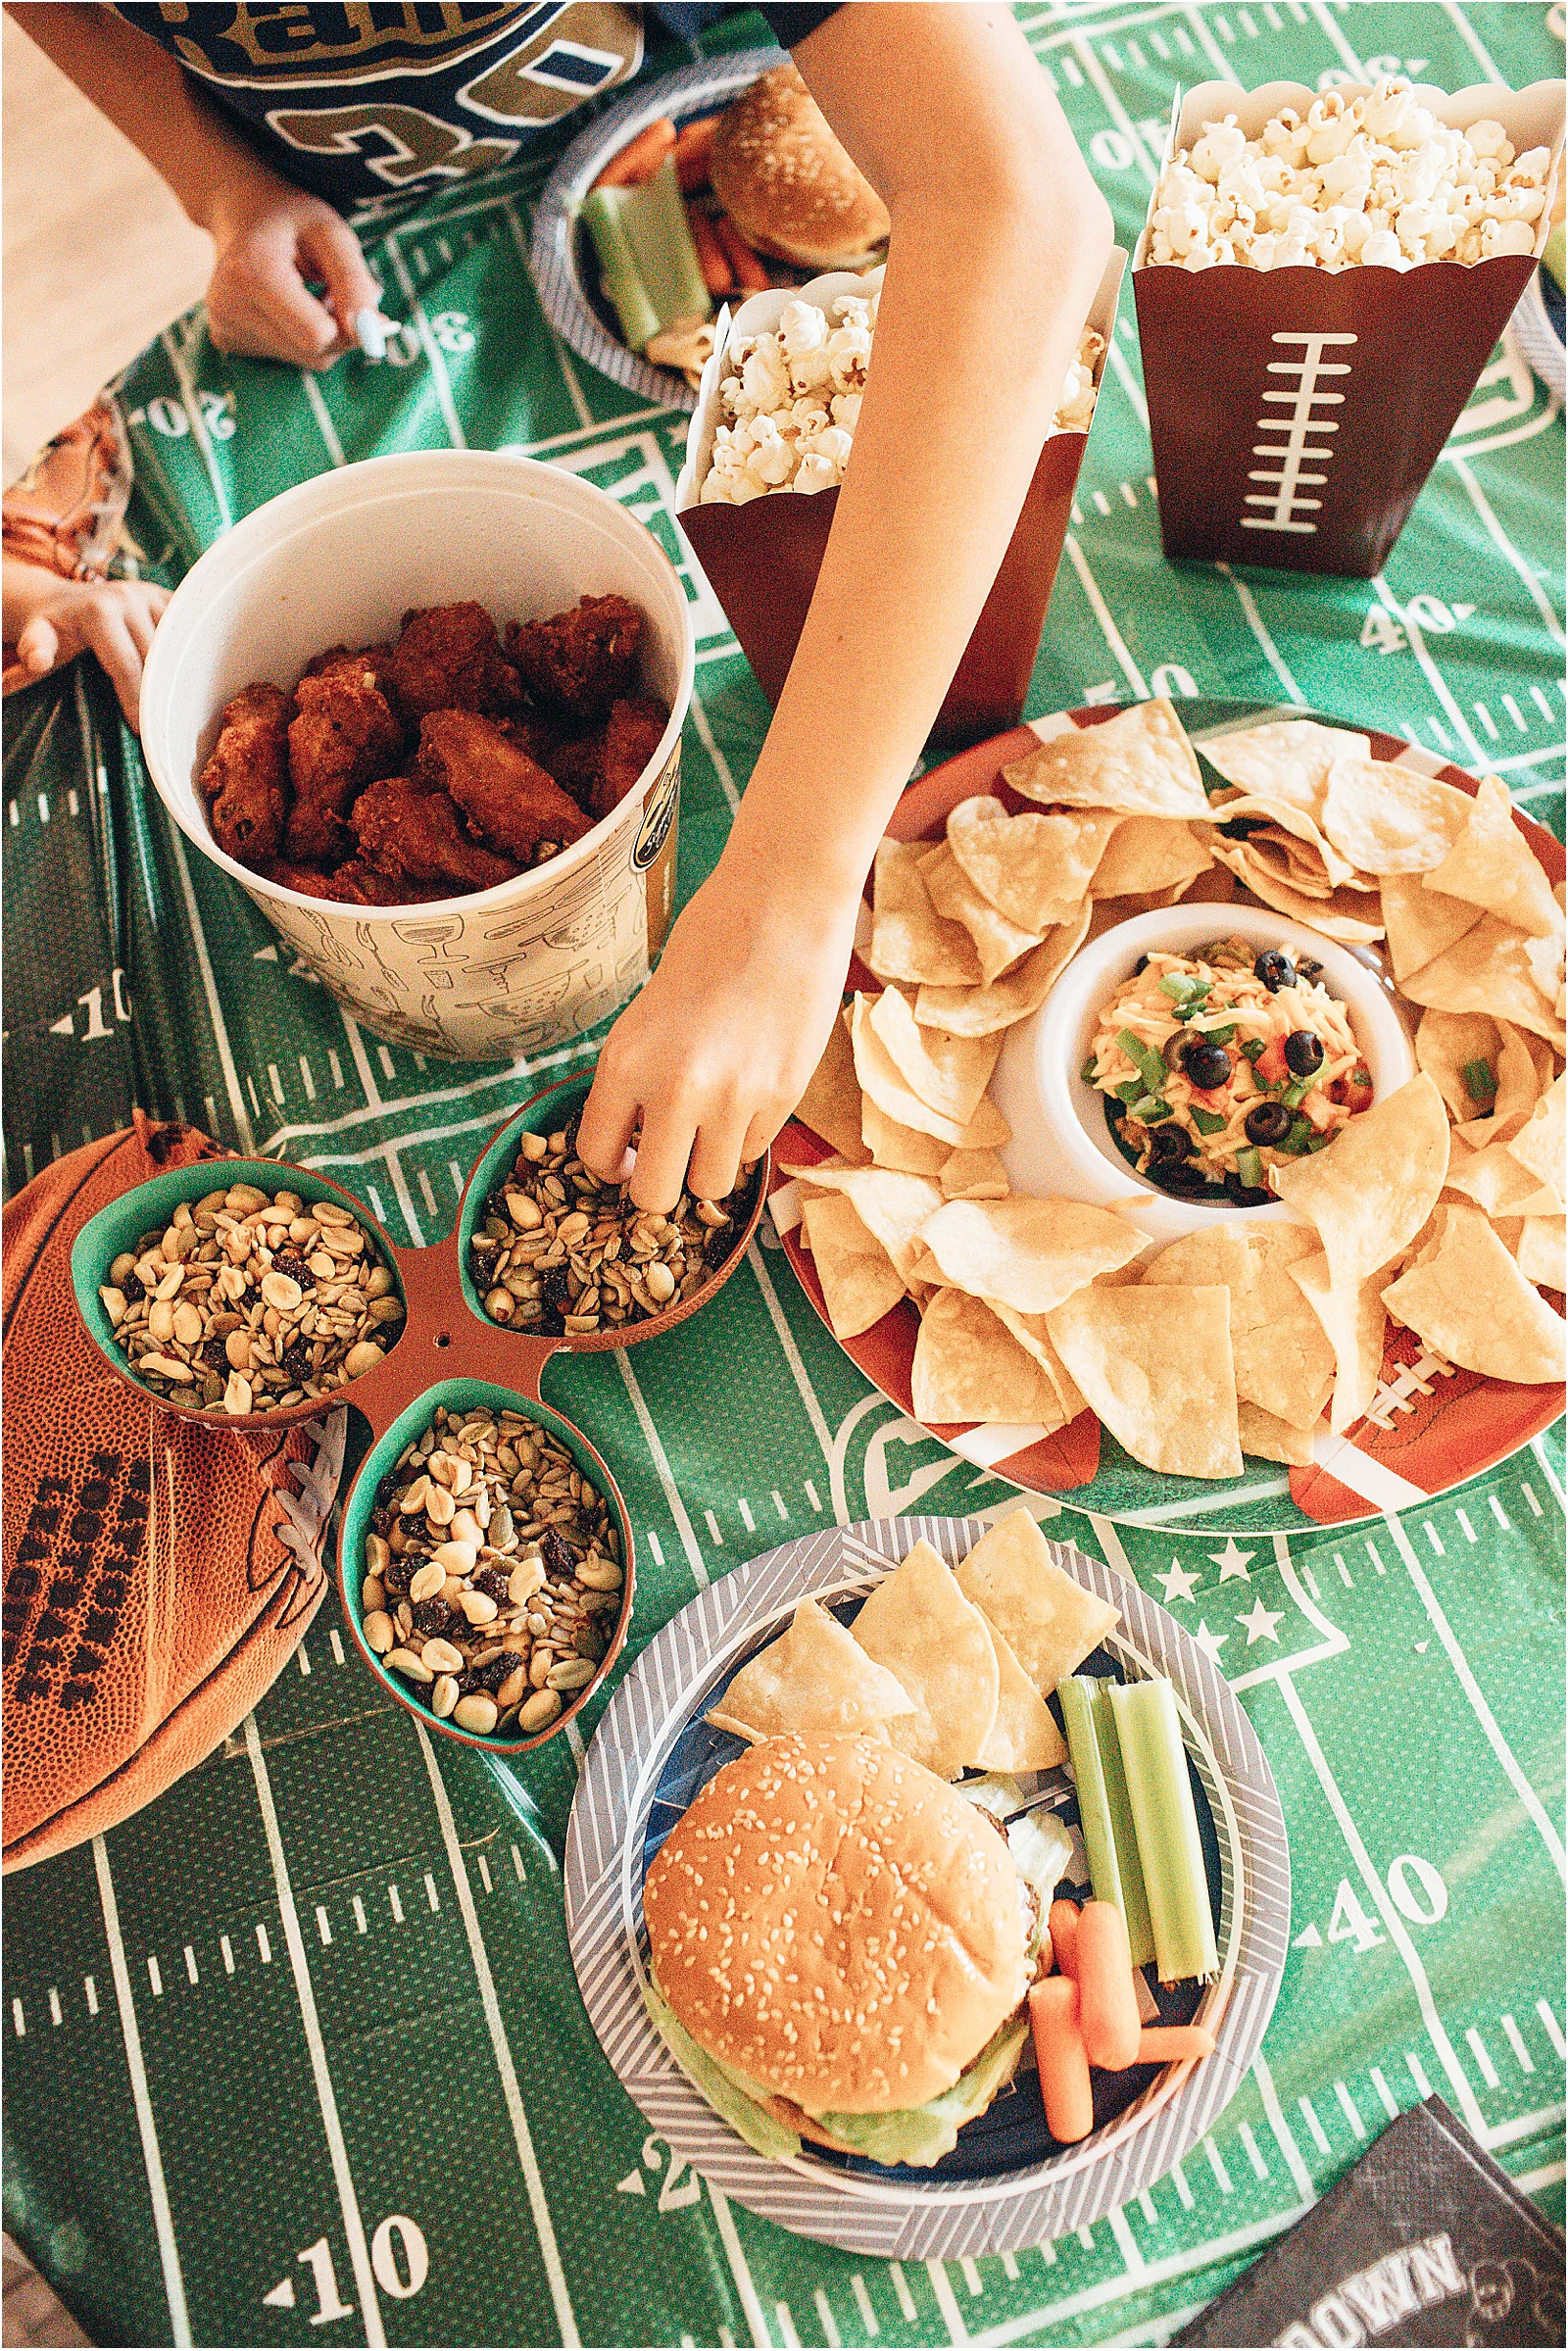 5 Tips For Planning A Super Bowl Party